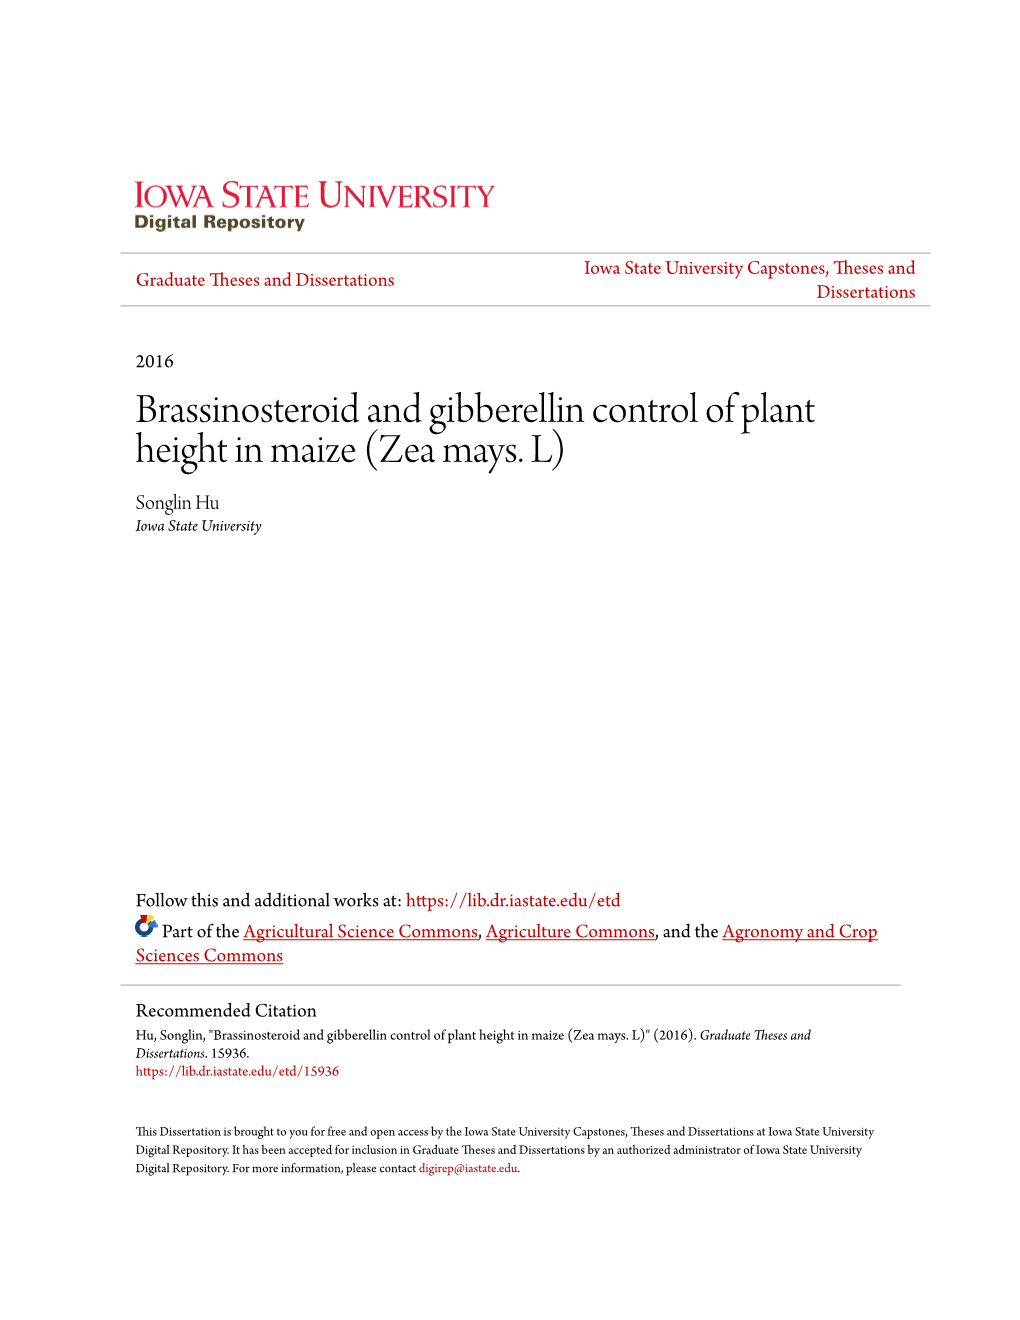 Brassinosteroid and Gibberellin Control of Plant Height in Maize (Zea Mays